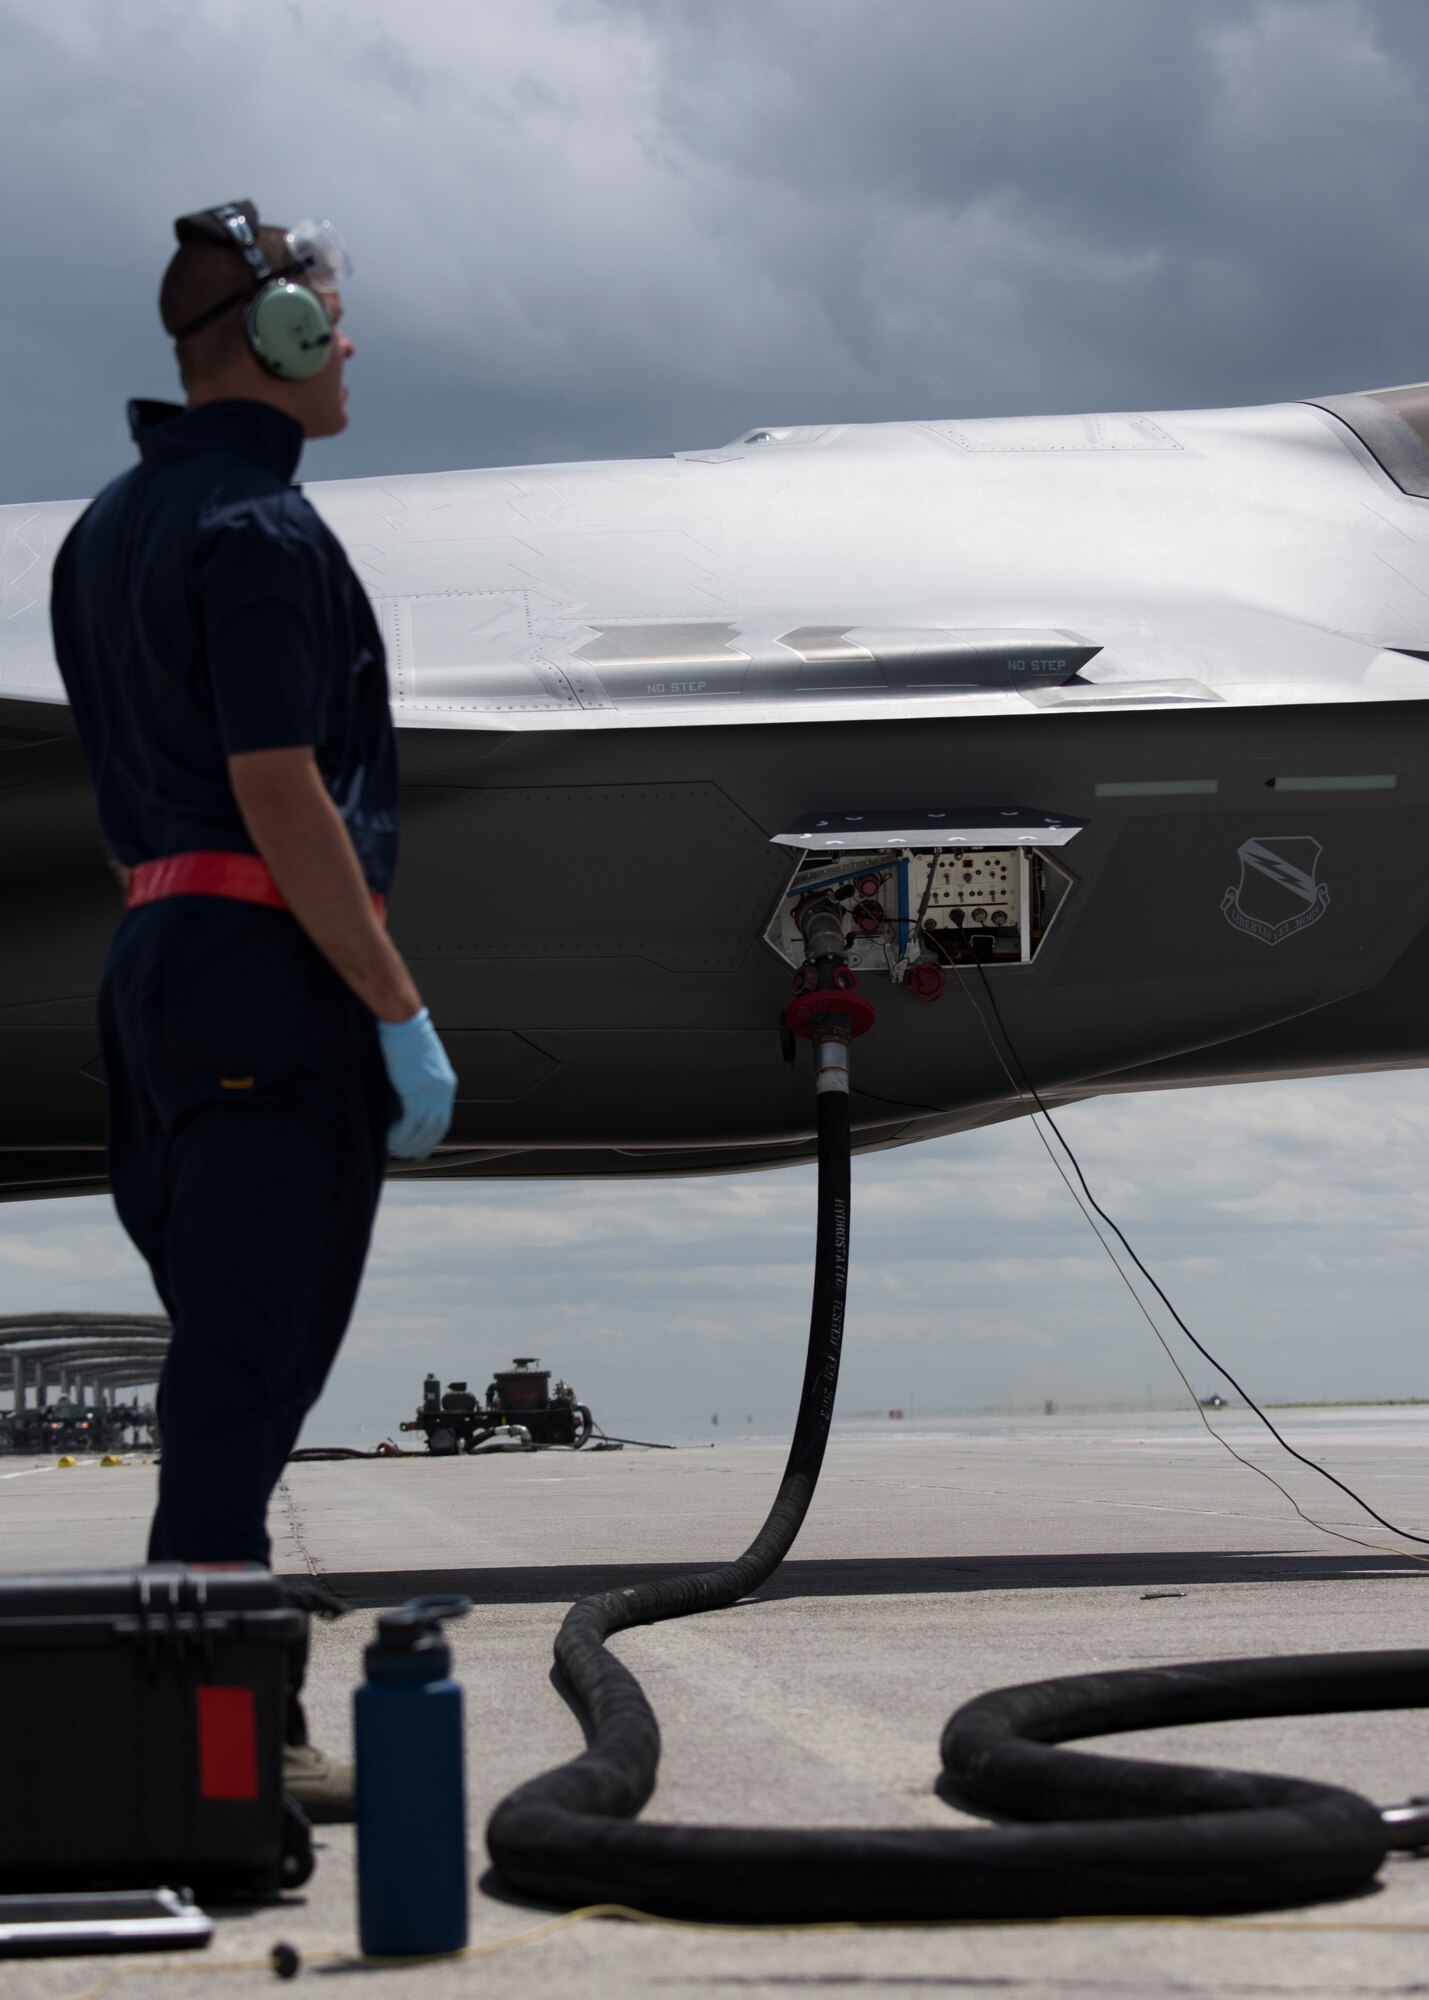 U.S. Air Force Senior Airman Michael Rogers, 388th Aircraft Maintenance Squadron avionics technician, performs a hot-pits refueling with a hose cart from the 1970s on an F-35 Lightning II from Hill Air Force Base, Utah, June 20, 2019, at Mountain Home Air Force Base, Idaho. A hot-pit allows aircraft to refuel without turning the engine off and quickly return to the air. The traditional refueling process can take more than an hour before the aircraft can take off, while a hot-pit takes 13 minutes. (U.S. Air Force photo by Airman First Class Andrew Kobialka)